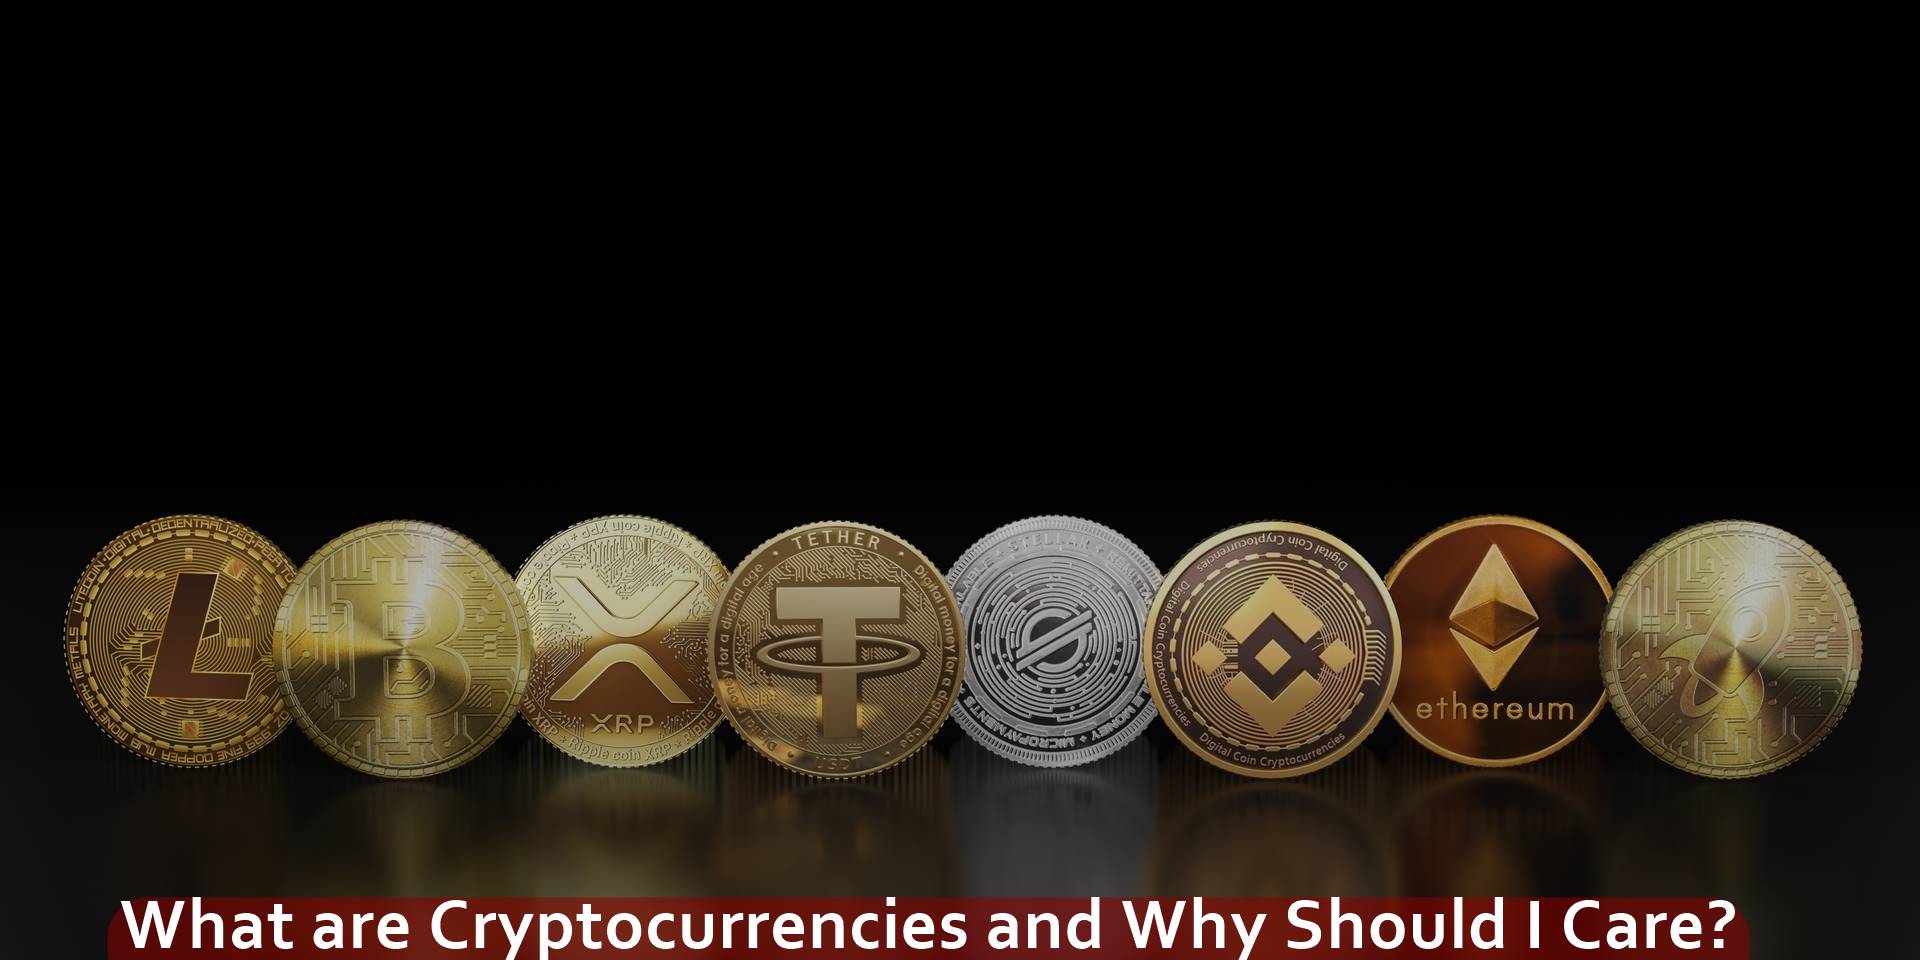 What are Cryptocurrencies and Why Should I Care?